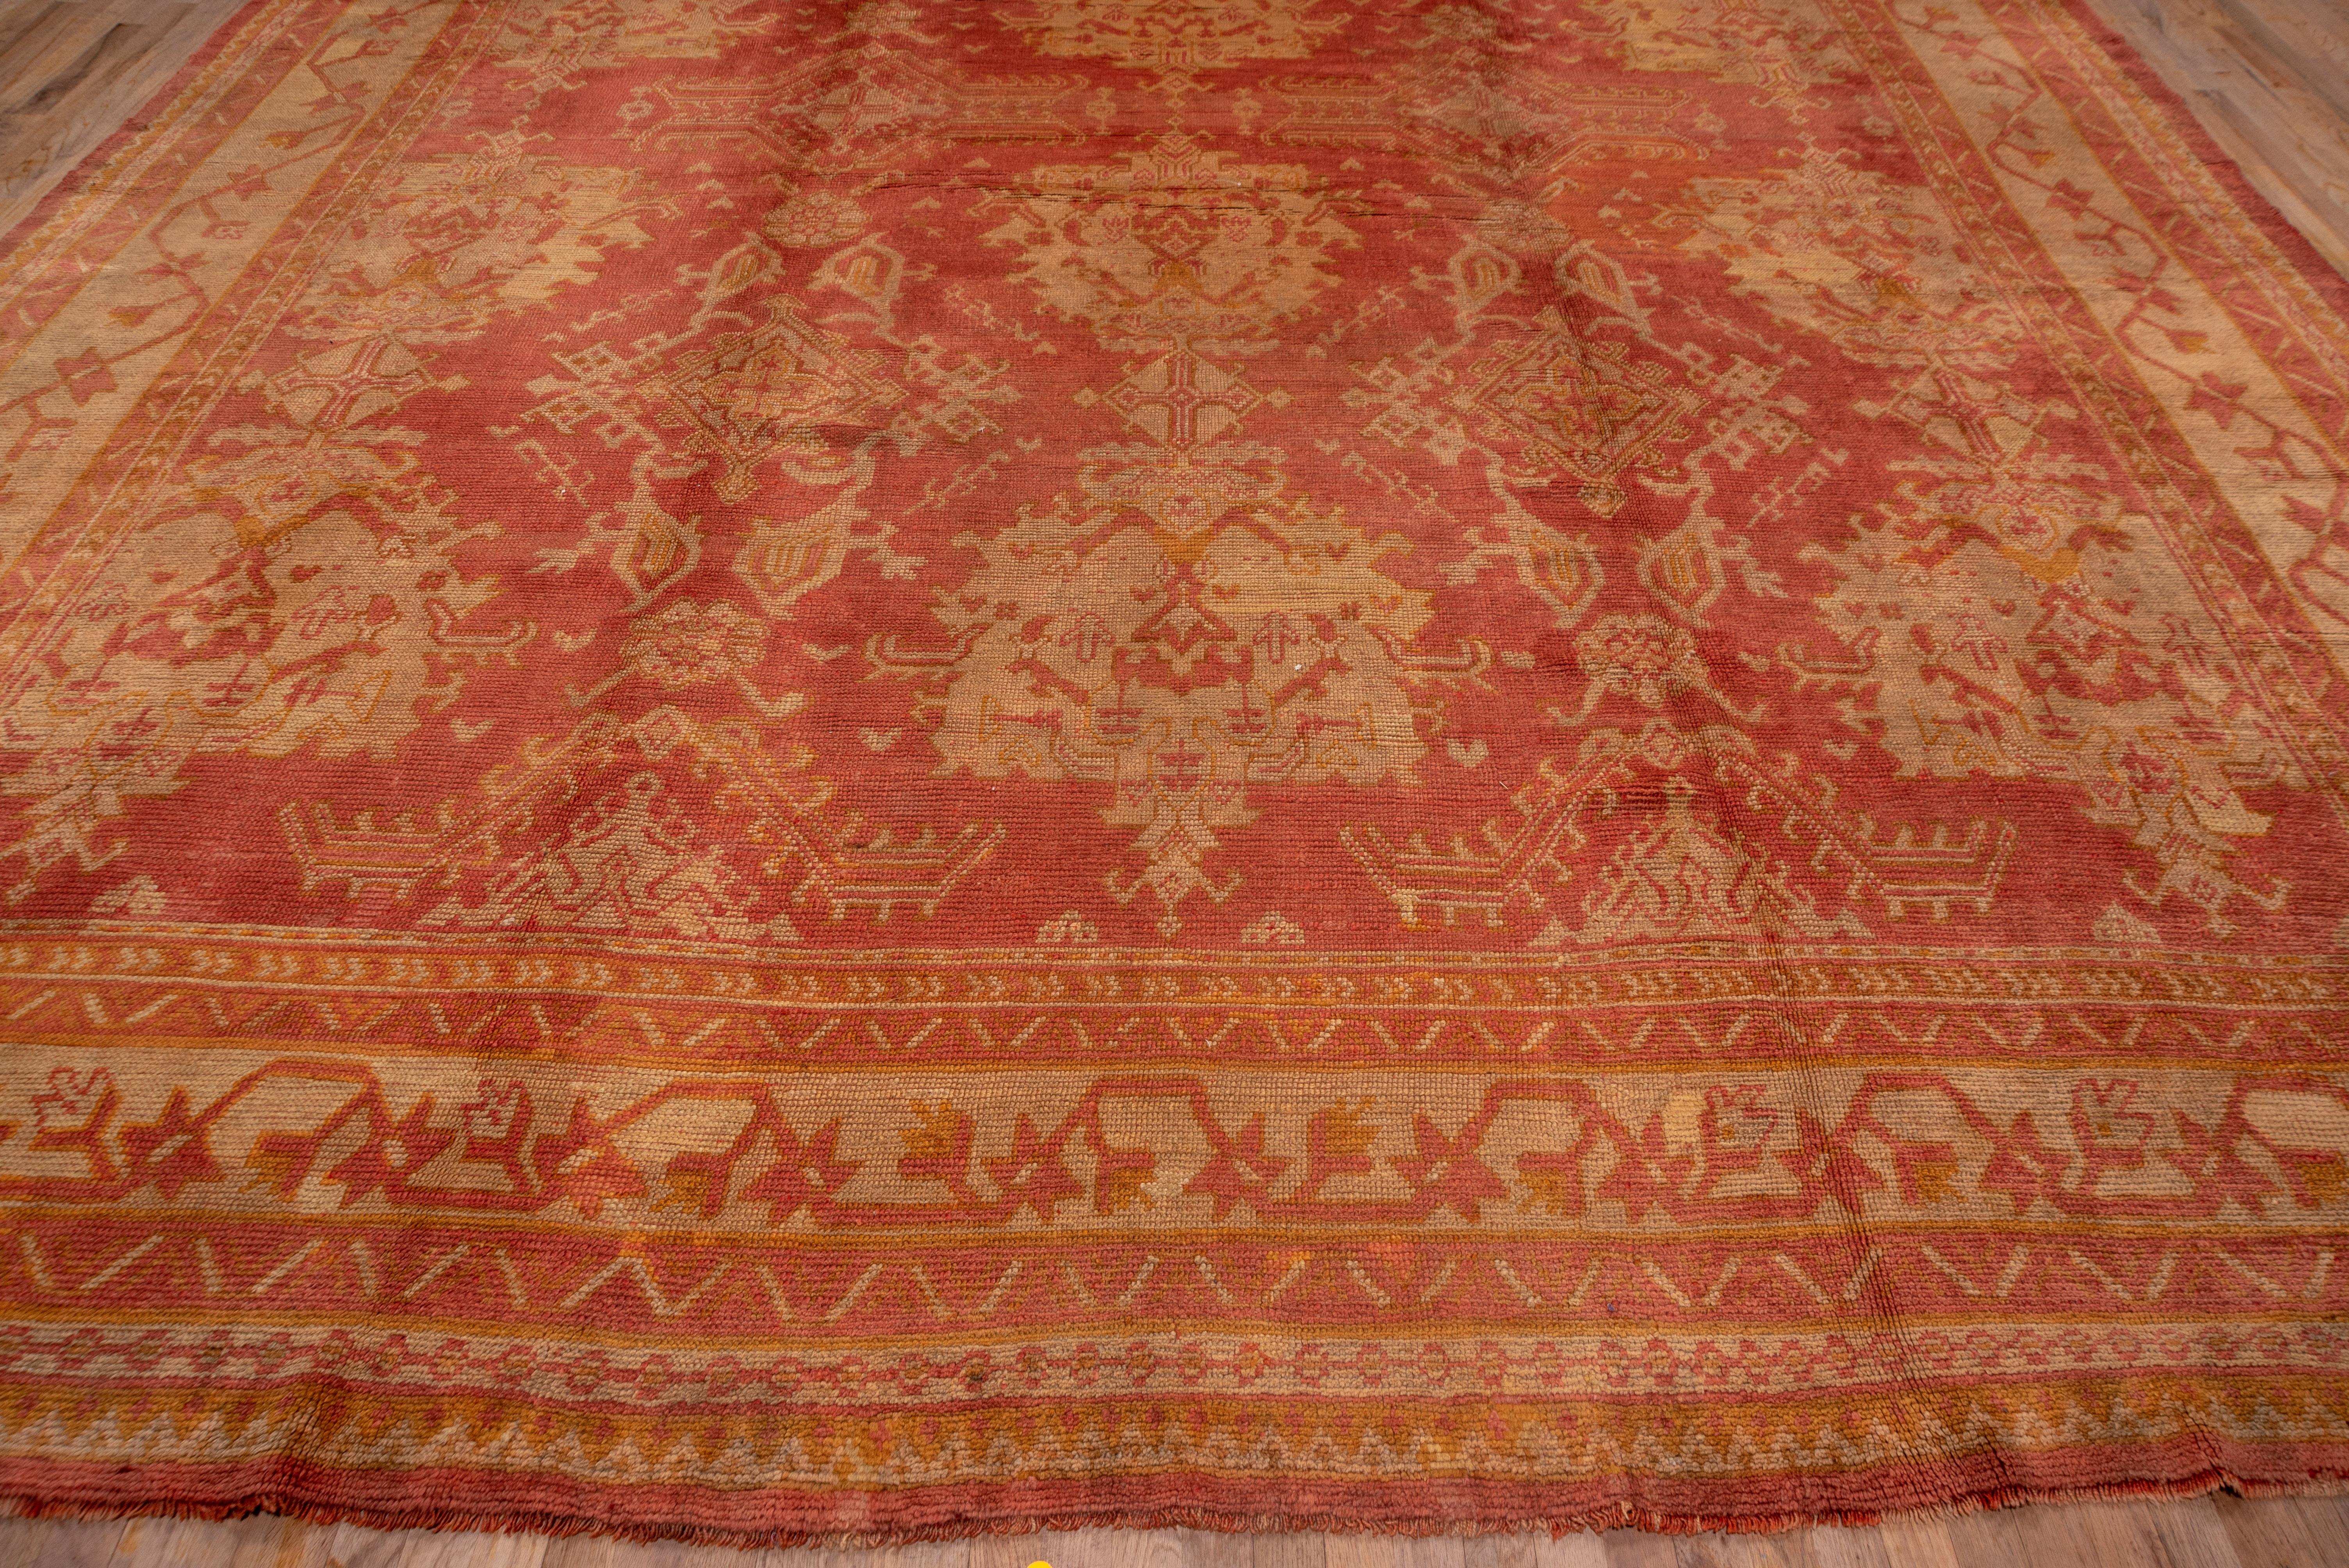 Wool 1910s Antique Turkish Oushak Area Rug, Light Red All-Over Field, Gold Borders For Sale